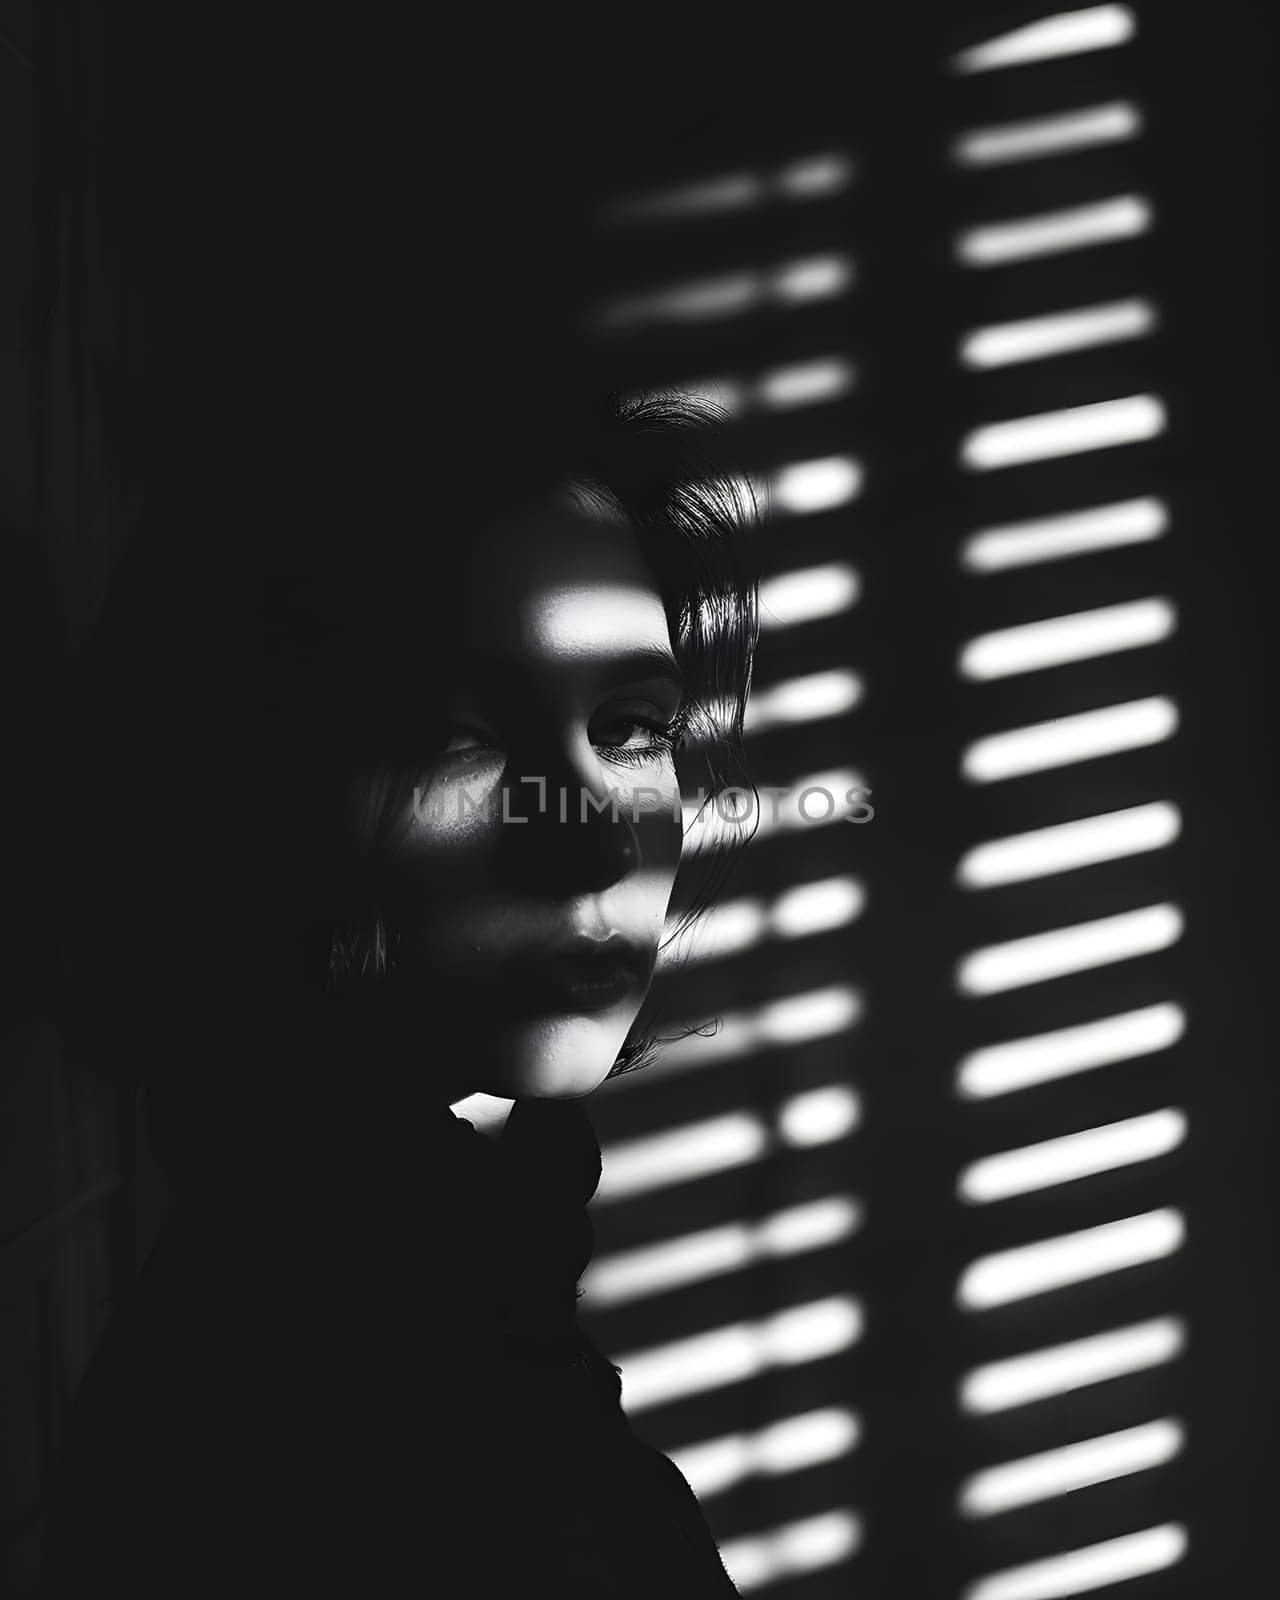 Monochrome portrait of a womans face seen through blinds by Nadtochiy